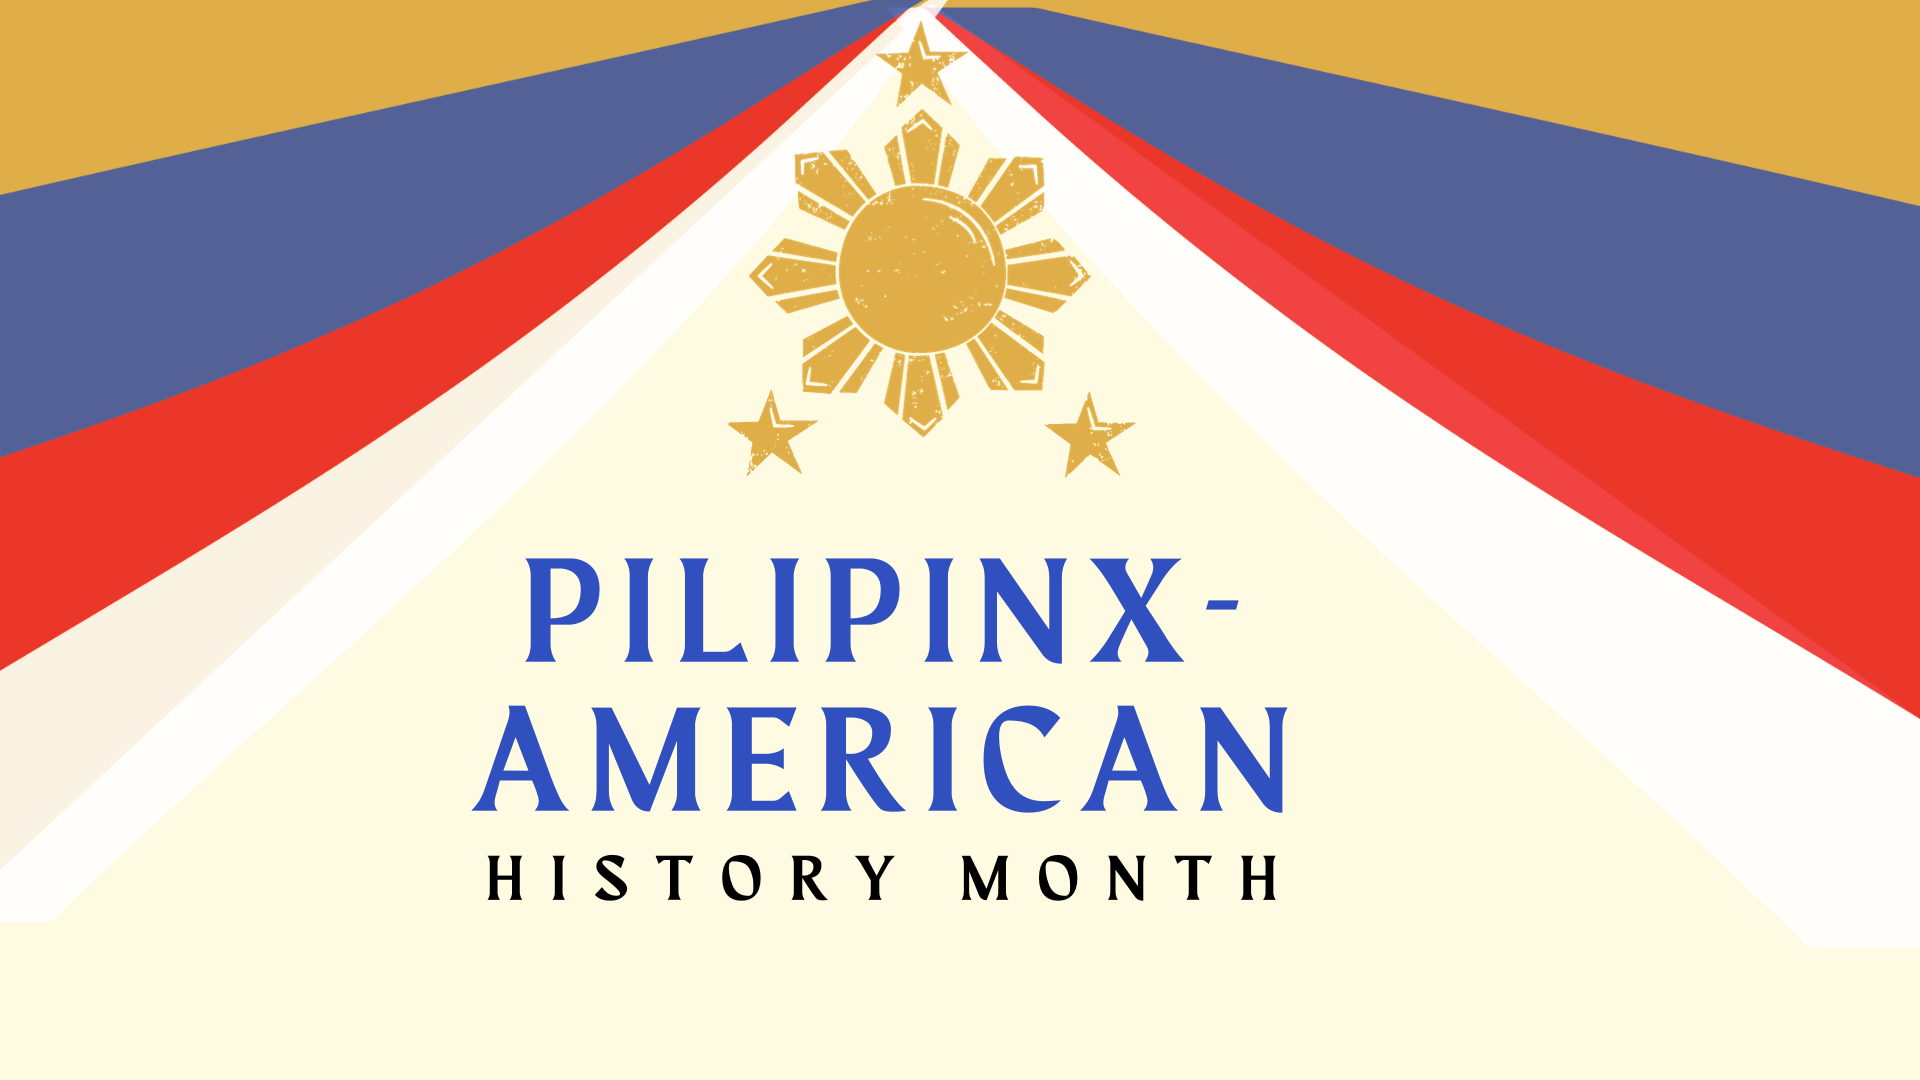 Pilipinx American History Month Background Image